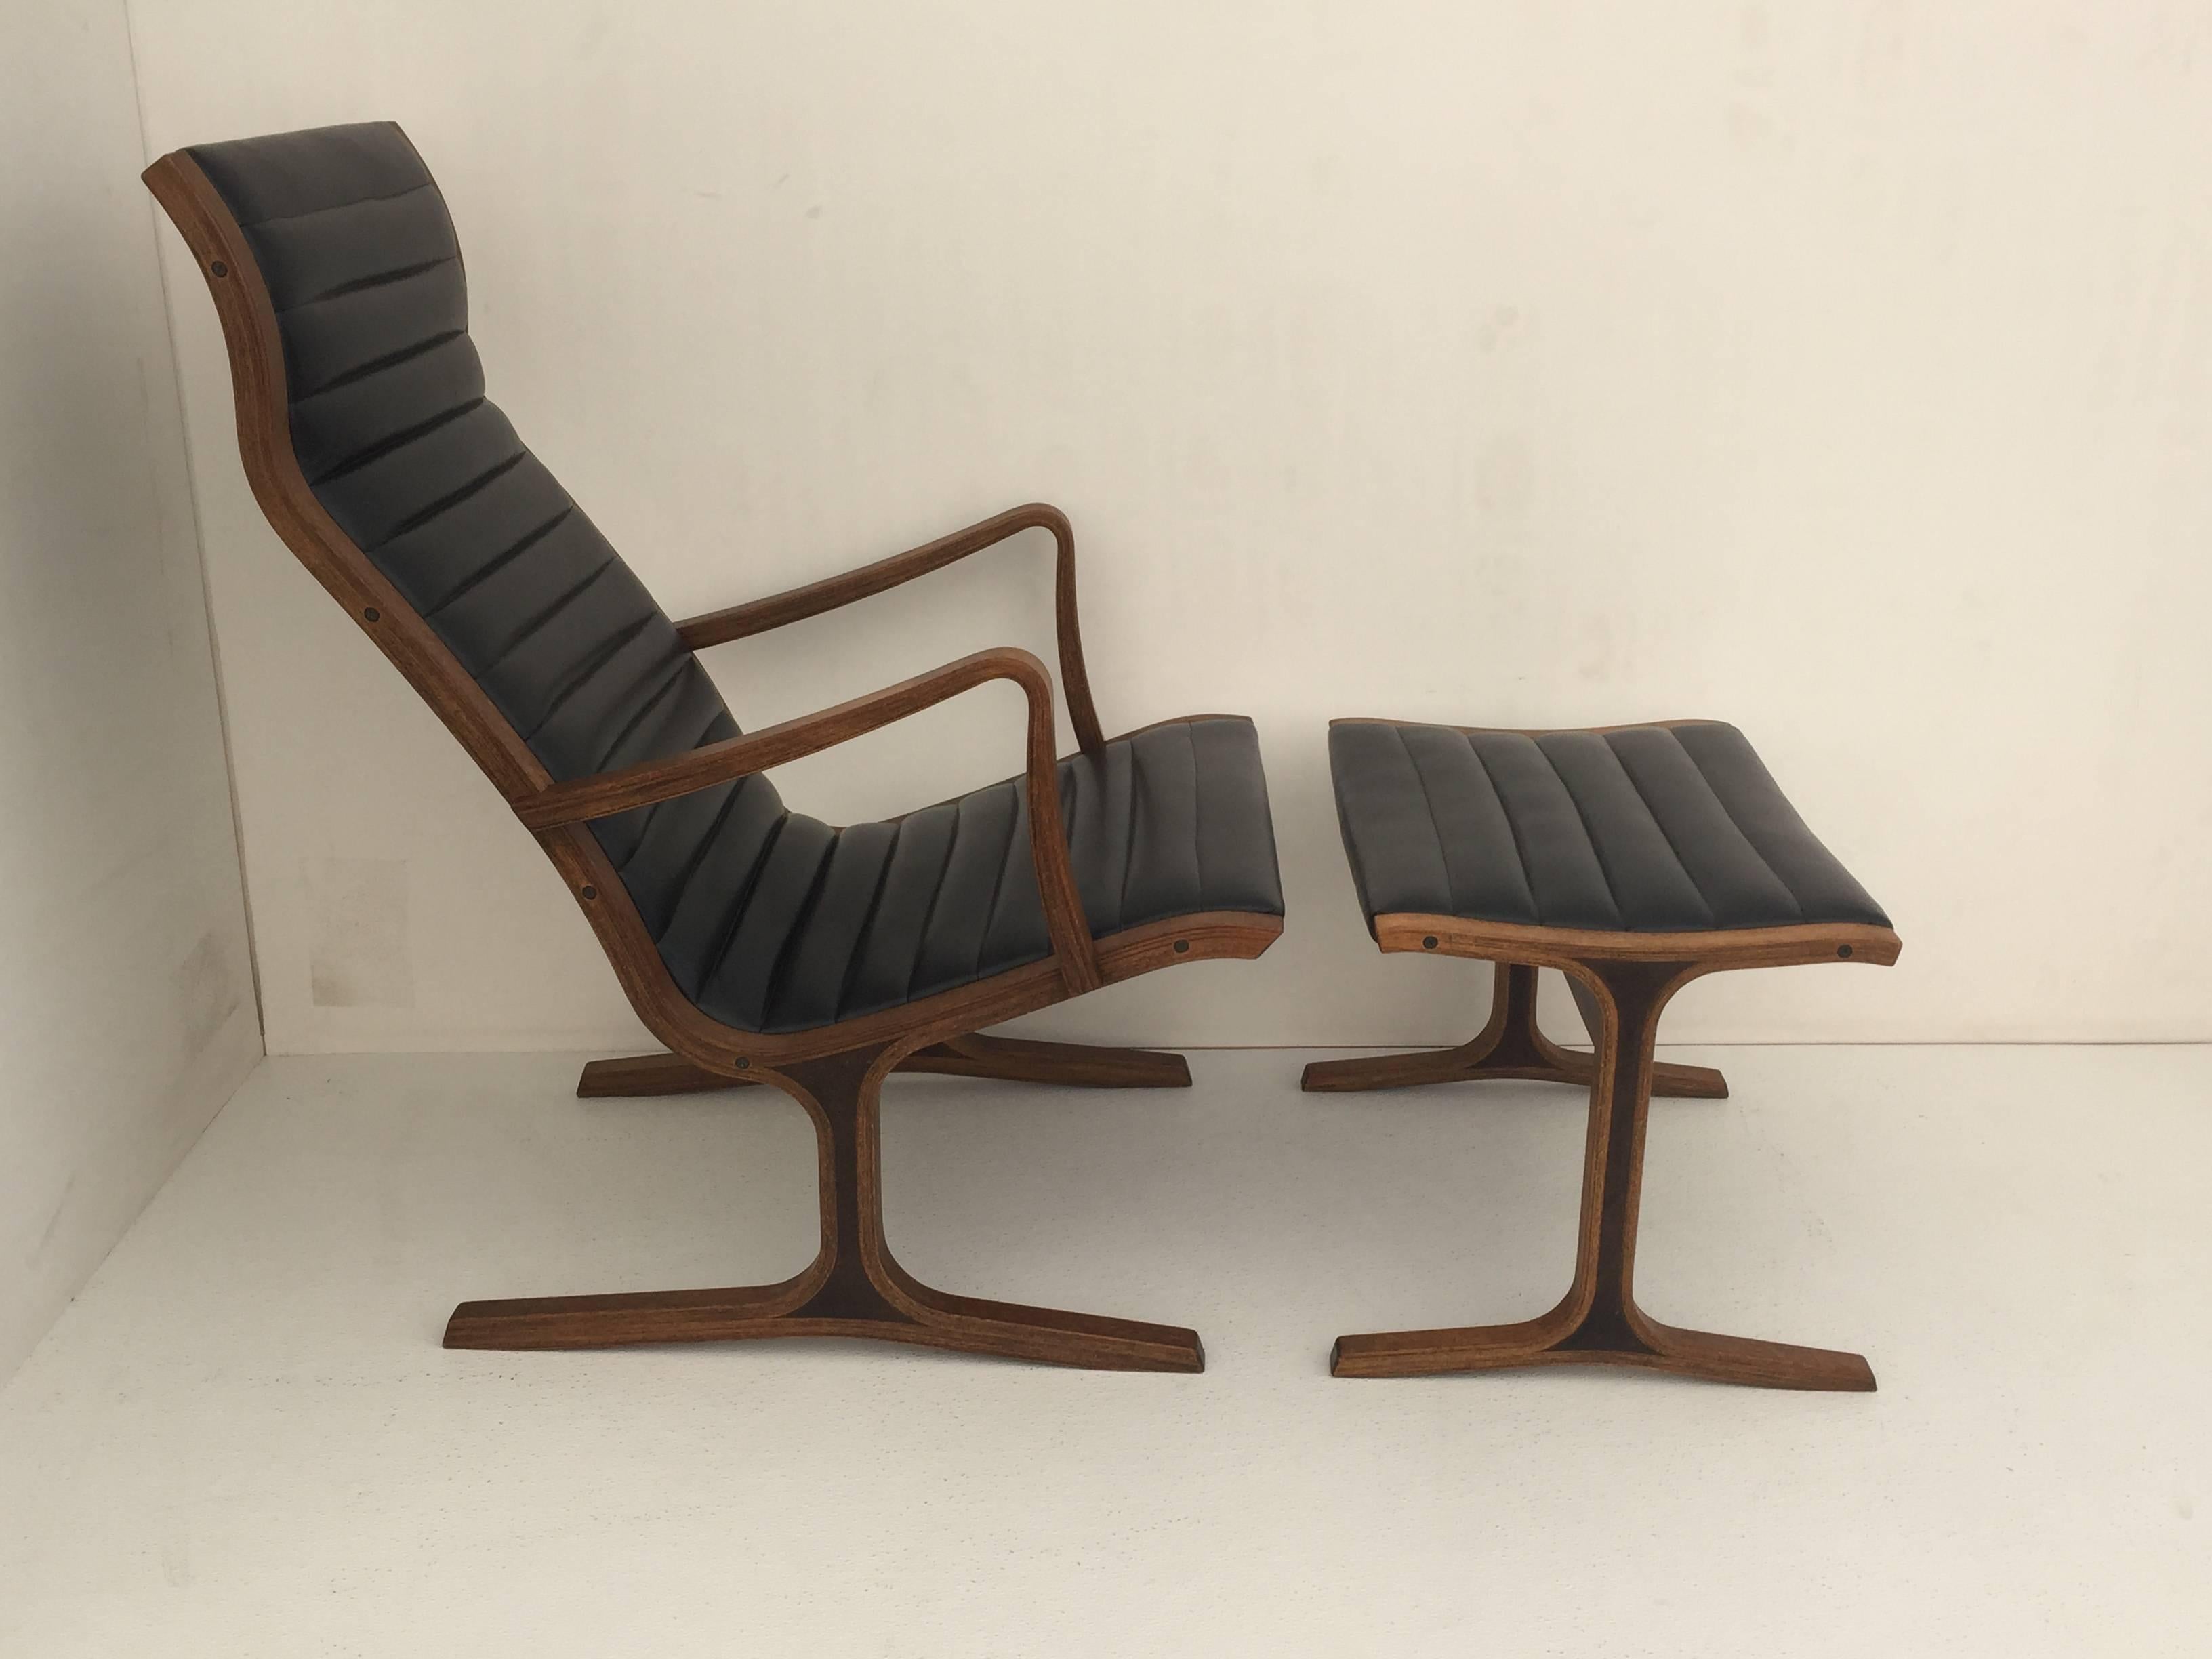 Heron chair and footrest designed by Mitsumasa Sugasawa for Tendo Mokko Japan. Made of bentwood and upholstered in vinyl. 
Footrest measures 15.5"high, 15.5" deep and 22" wide.